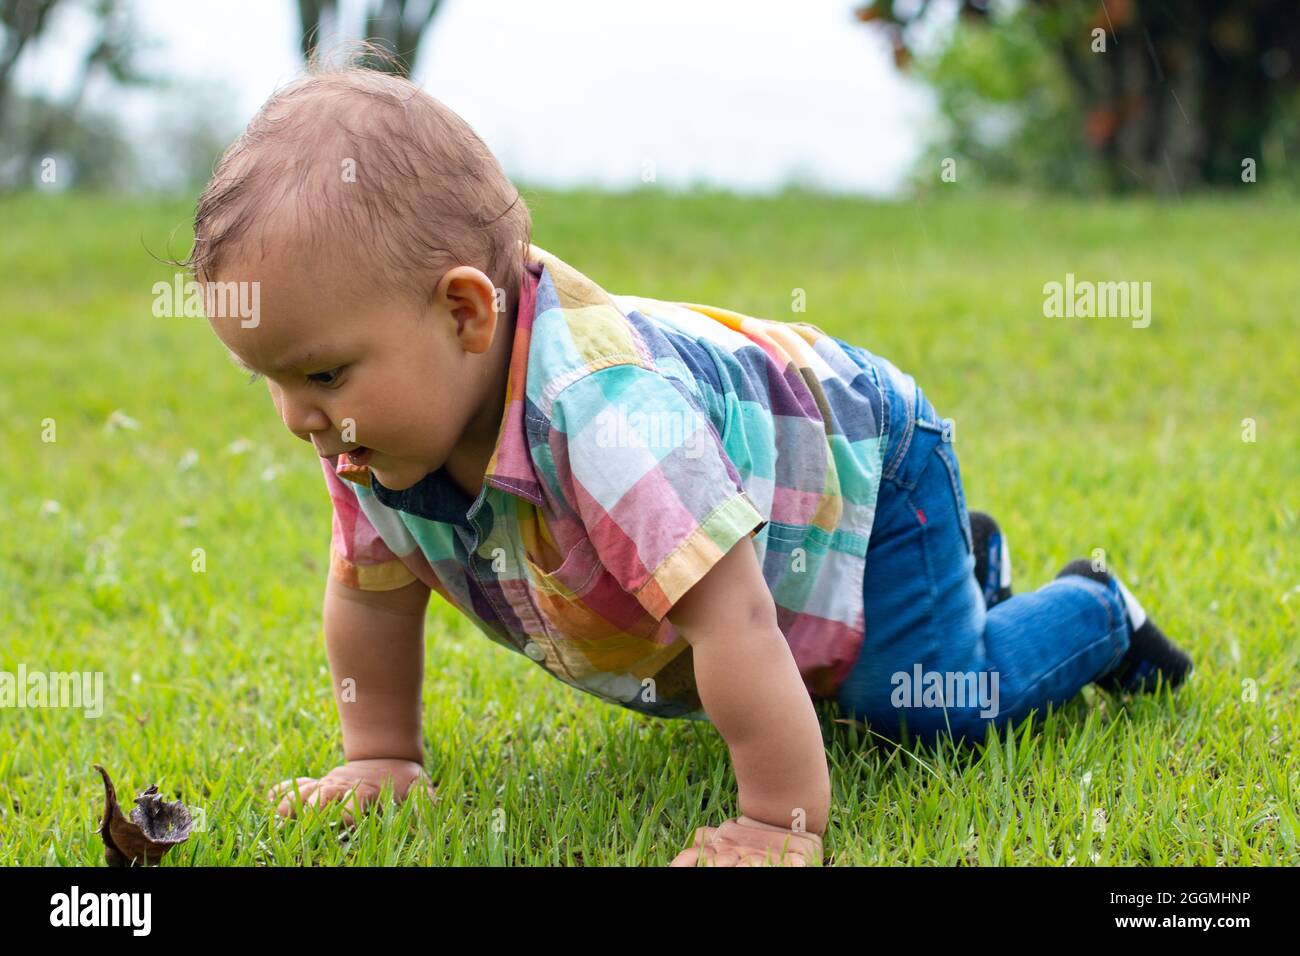 Baby crawling alone on the grass of a park surrounded by nature Stock Photo